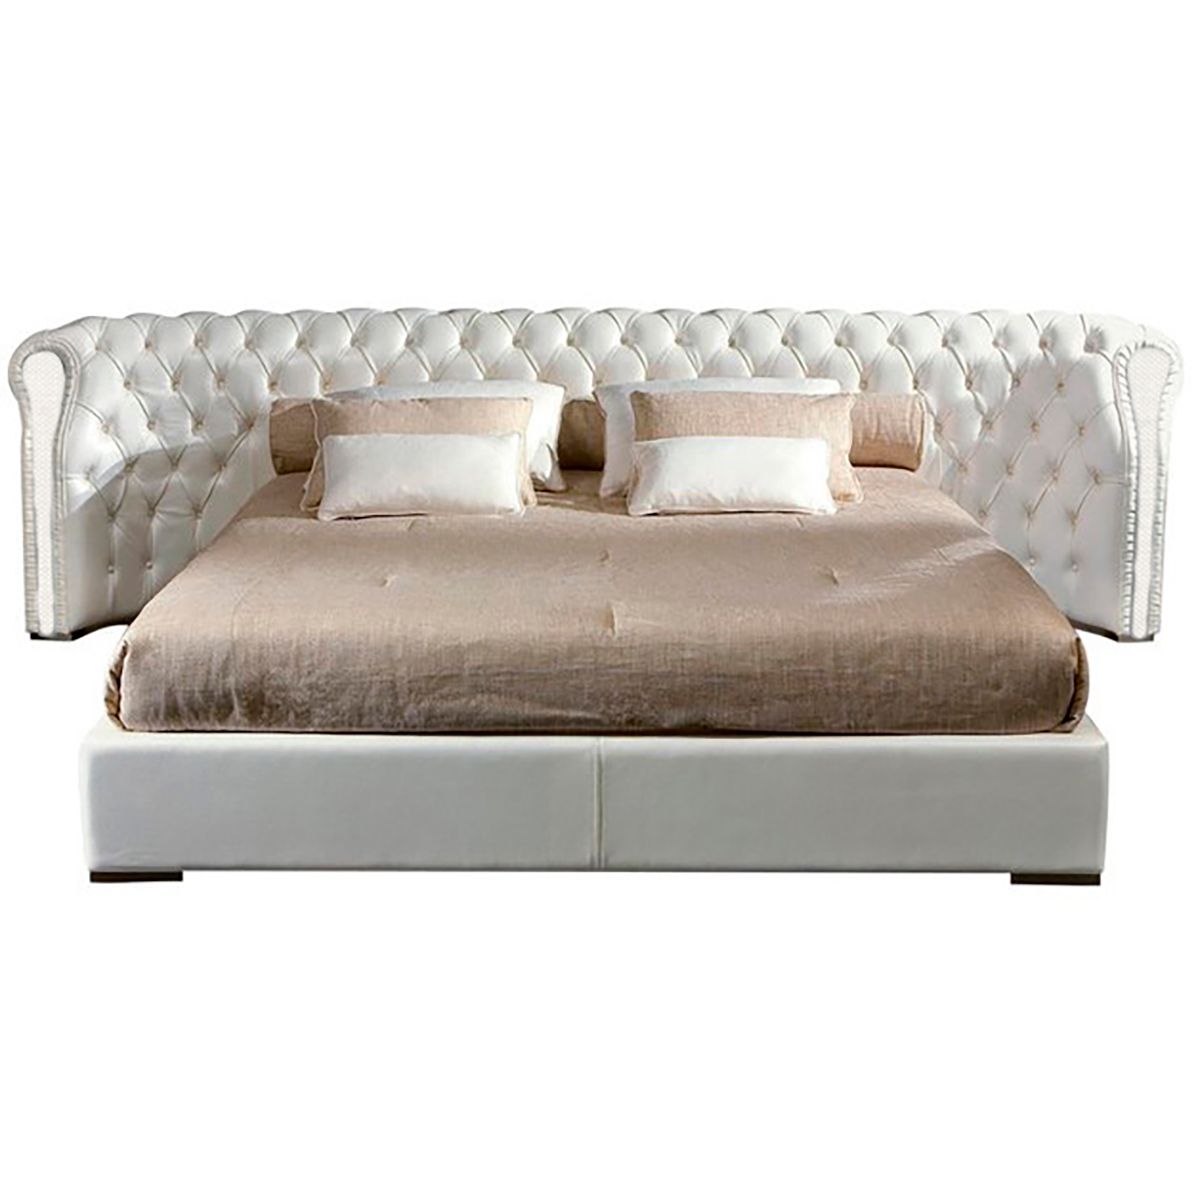 Double bed with upholstered headboard 160x200 cm beige Alpha Omega